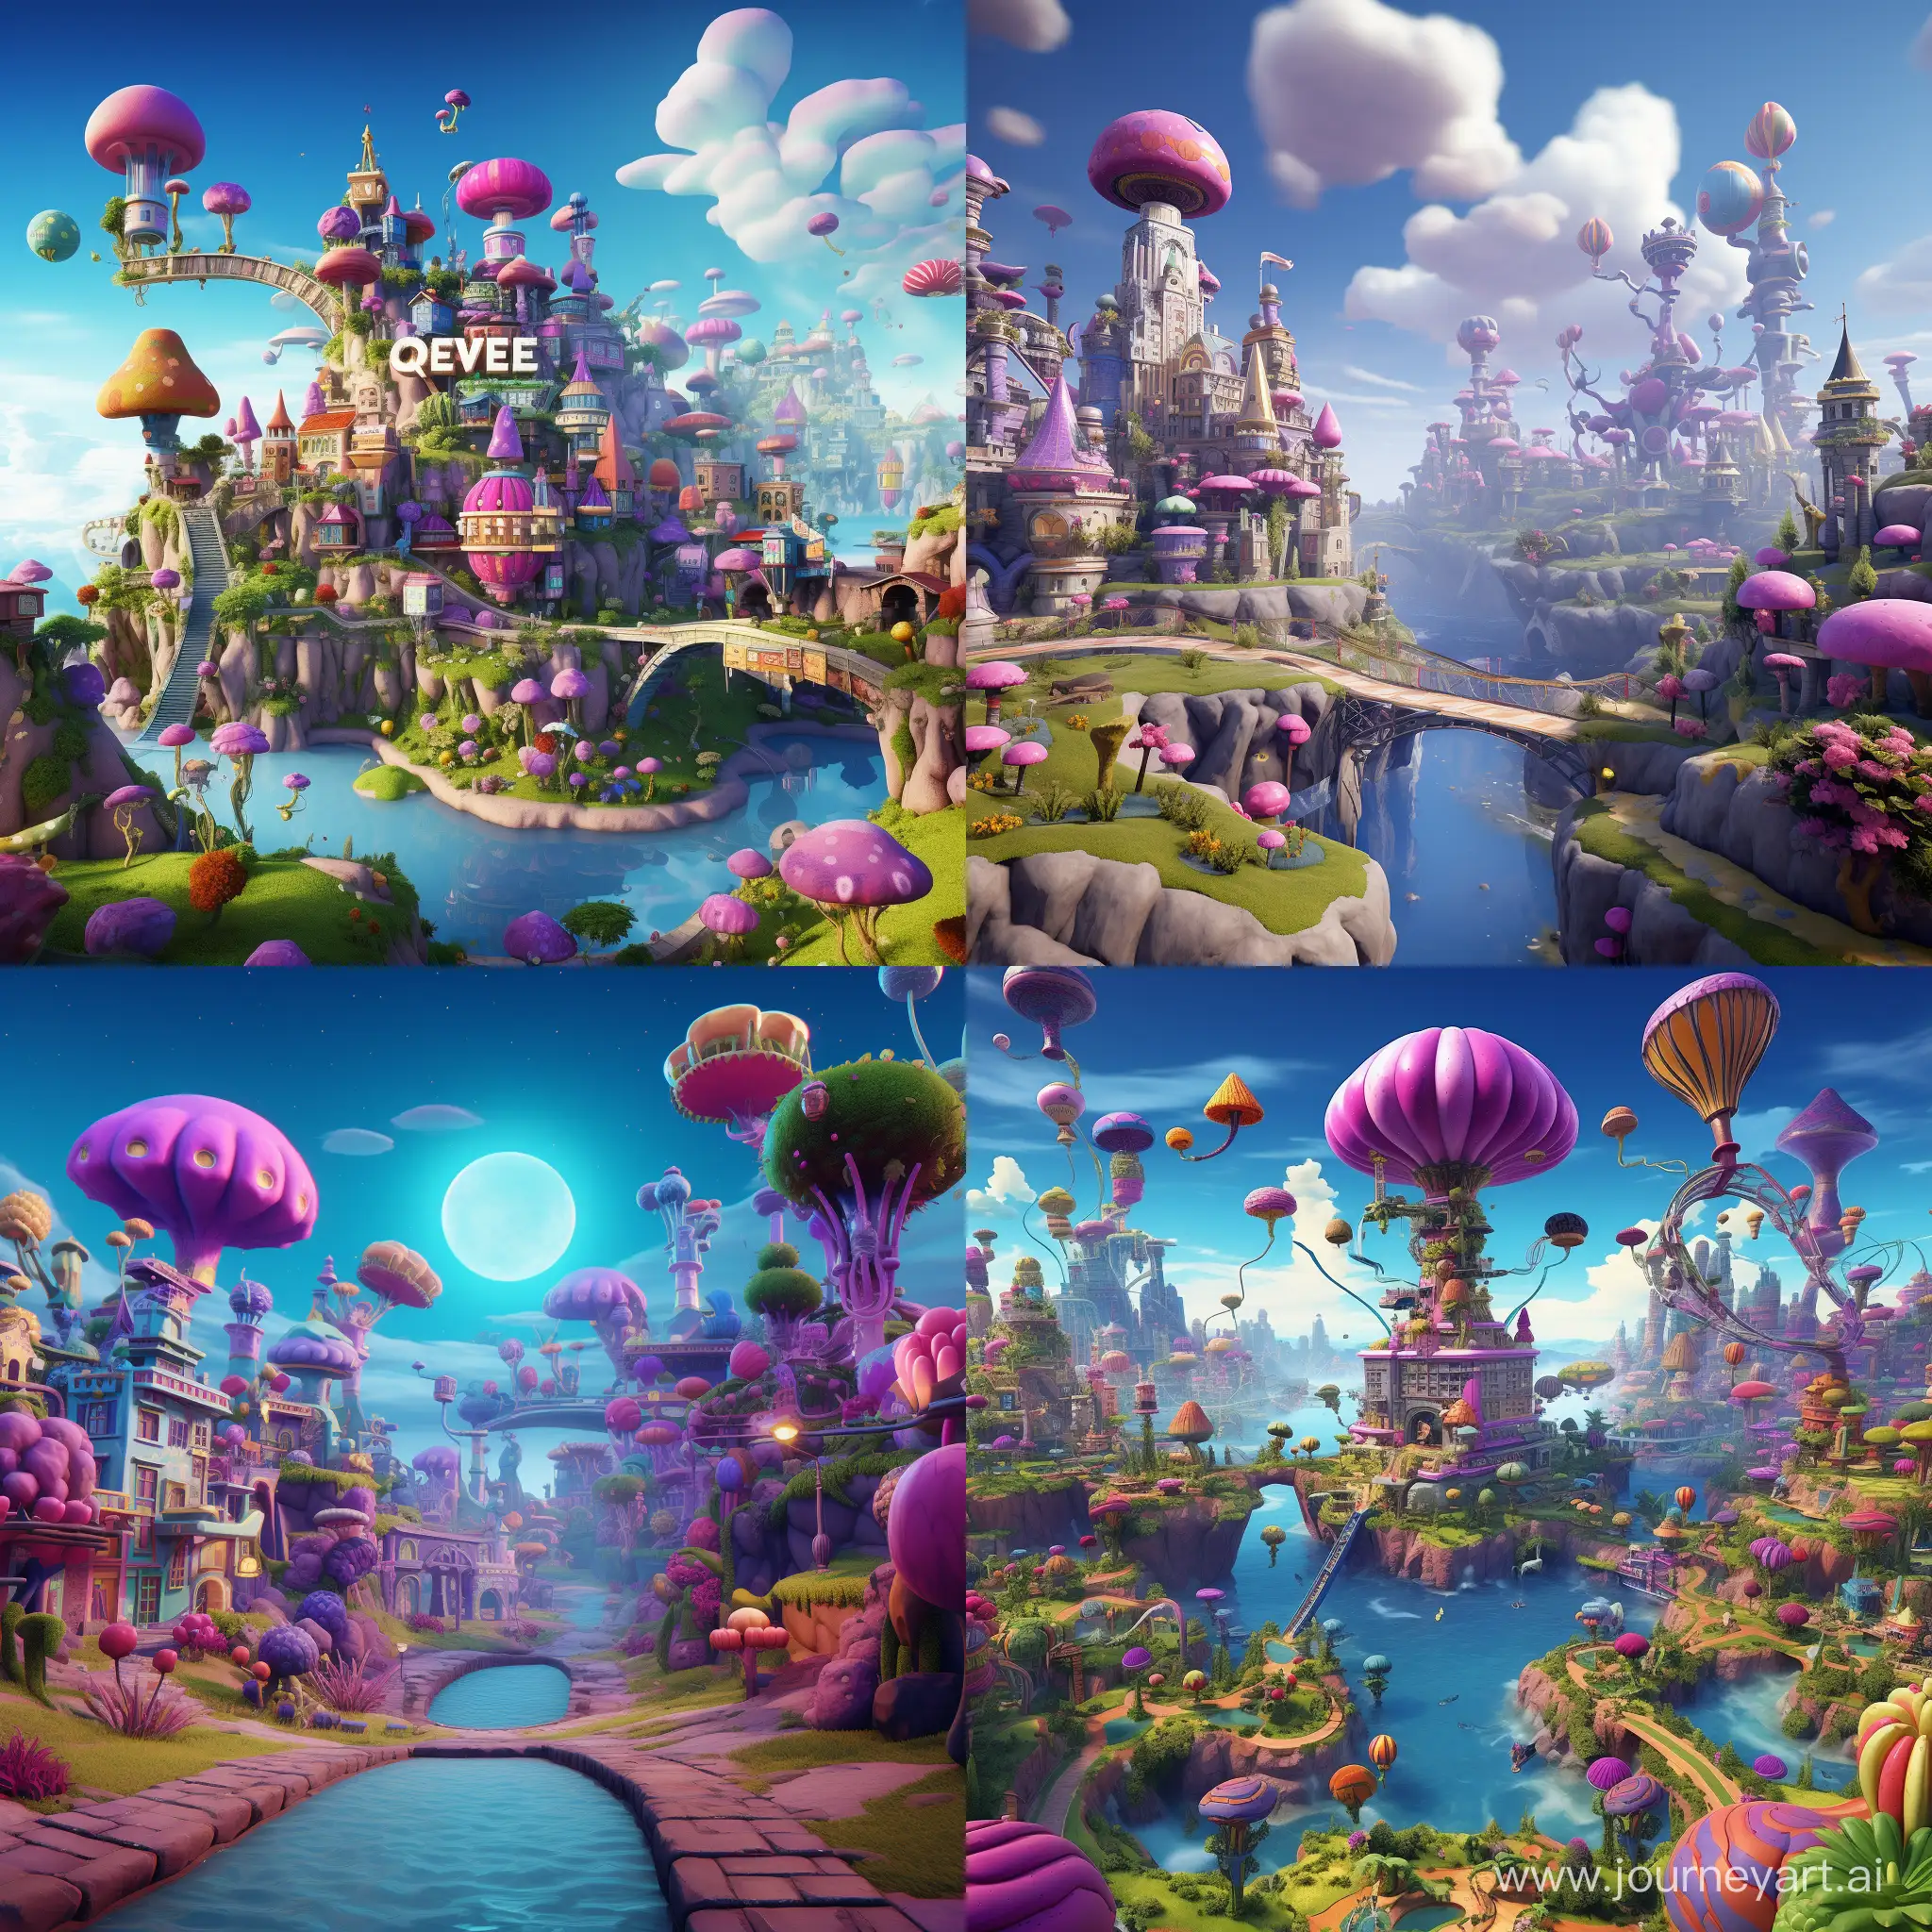 Fortnite game level redesigned by Rachel Maclean